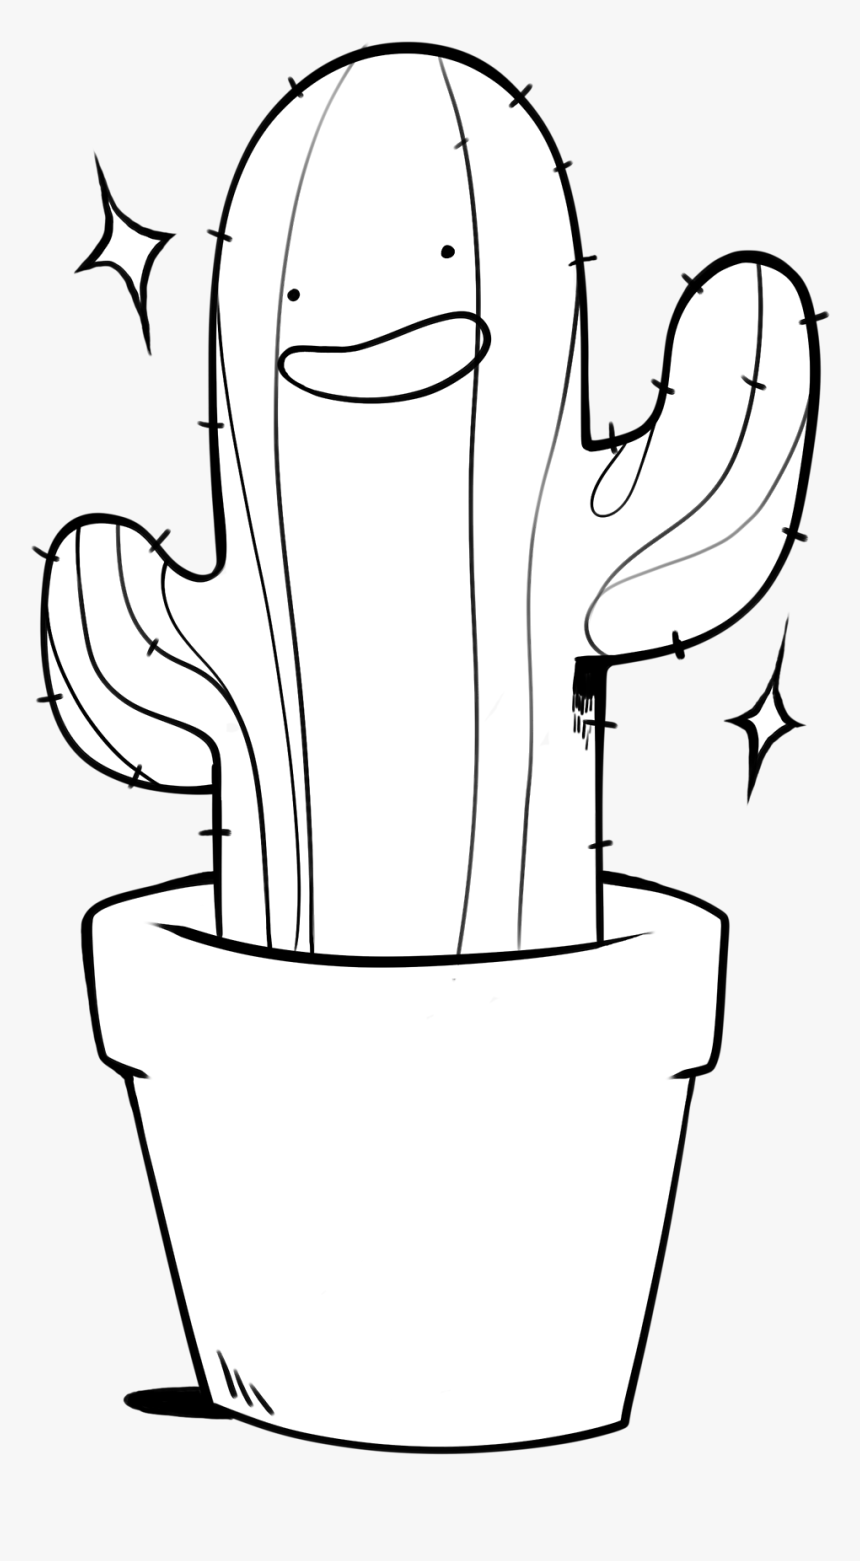 “handsome Cactus Boy Sticker
click Here To Purchase
” - Cactus, HD Png Download, Free Download